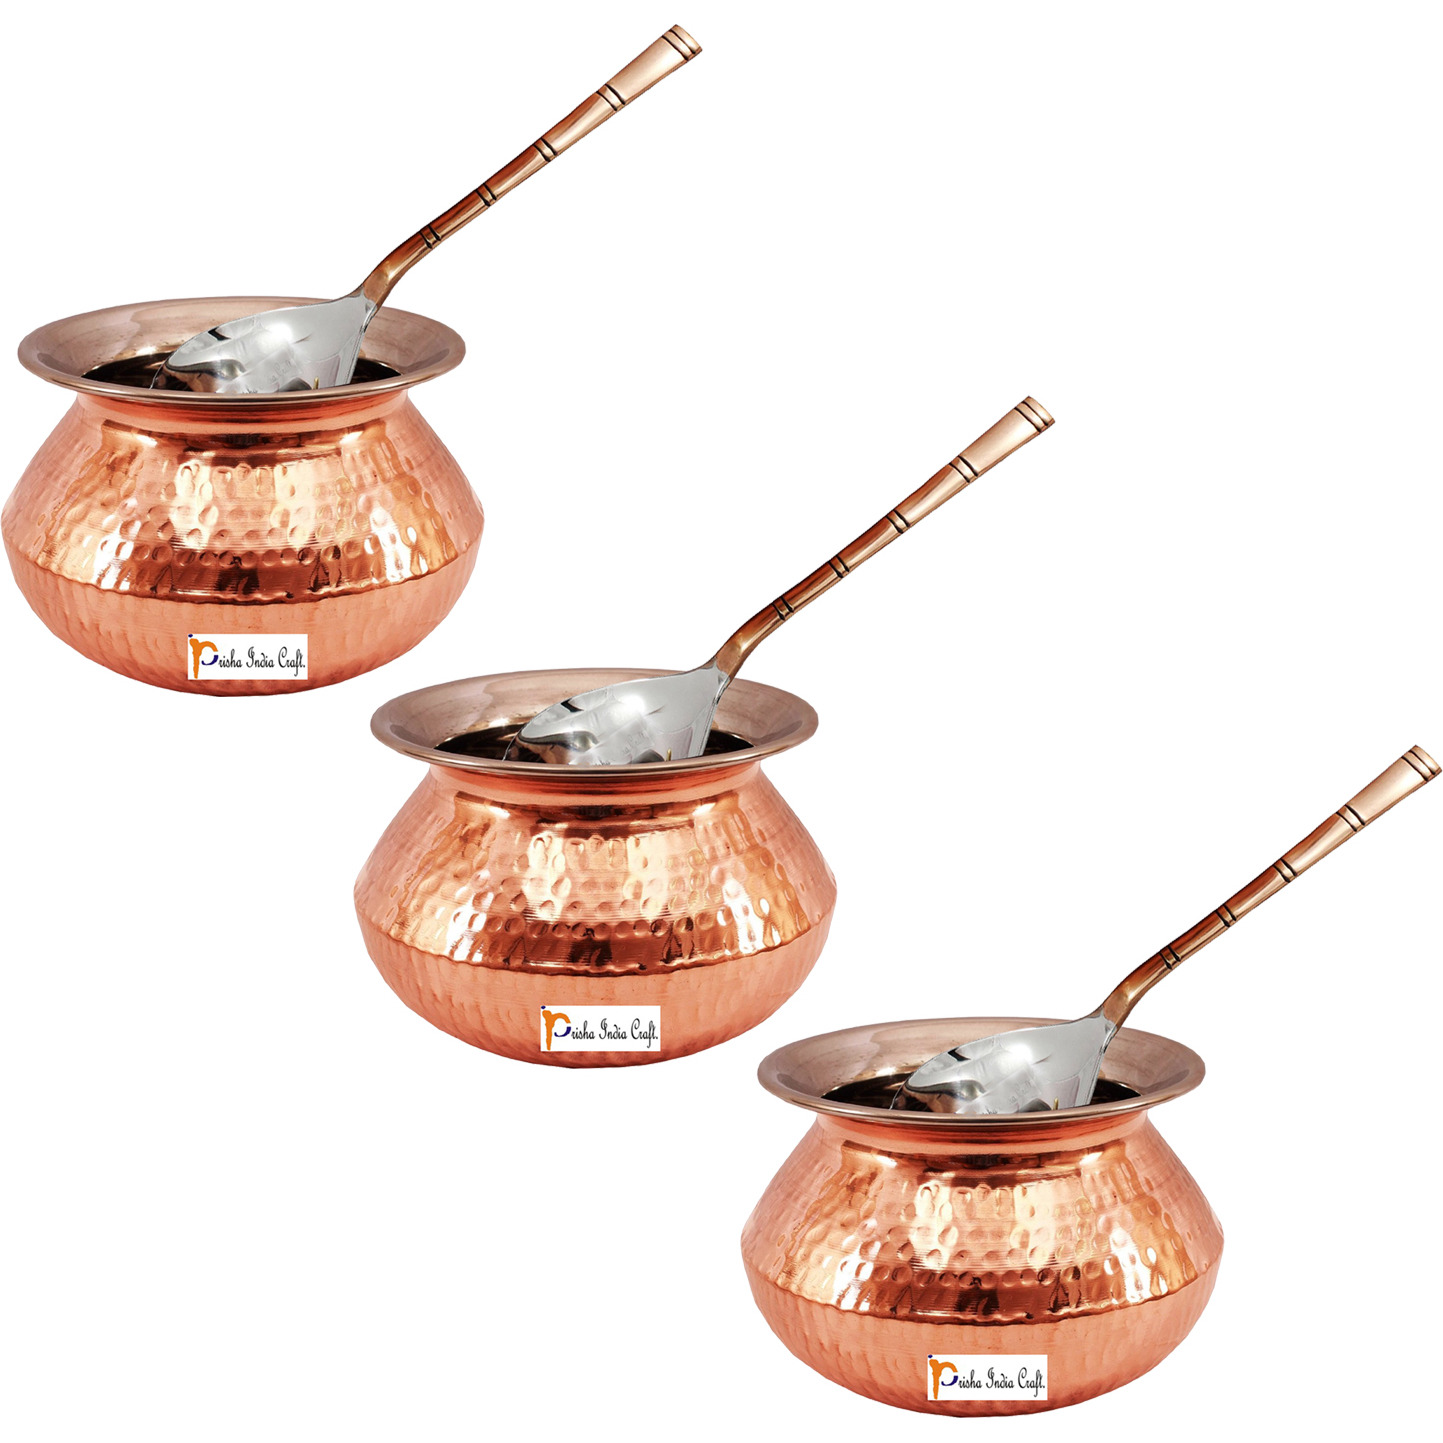 Set of 3 Prisha India Craft B. High Quality Handmade Steel Copper Casserole and Serving Spoon - Set of Copper Handi and Serving Spoon - Copper Bowl Dia - 5.5  X Height - 3.50  - Christmas Gift